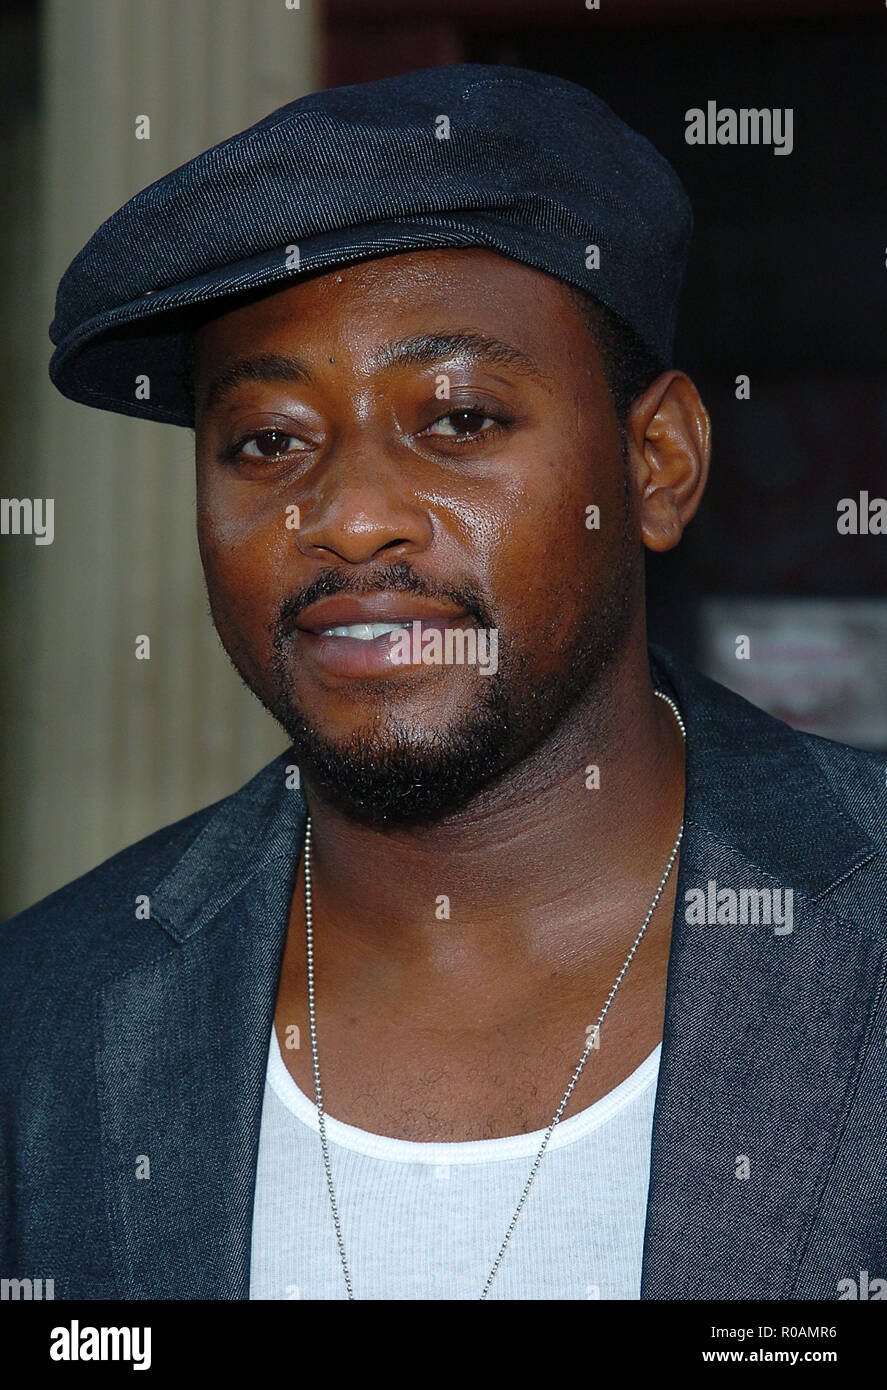 Omar Epps (House) arriving at the 2004 Summer tca Fox All-Star Party on the Fox Lot in Los Angeles. July 16, 2004. EppsOmar House081A Red Carpet Event, Vertical, USA, Film Industry, Celebrities,  Photography, Bestof, Arts Culture and Entertainment, Topix Celebrities fashion /  Vertical, Best of, Event in Hollywood Life - California,  Red Carpet and backstage, USA, Film Industry, Celebrities,  movie celebrities, TV celebrities, Music celebrities, Photography, Bestof, Arts Culture and Entertainment,  Topix, headshot, vertical, one person,, from the year , 2004, inquiry tsuni@Gamma-USA.com Stock Photo